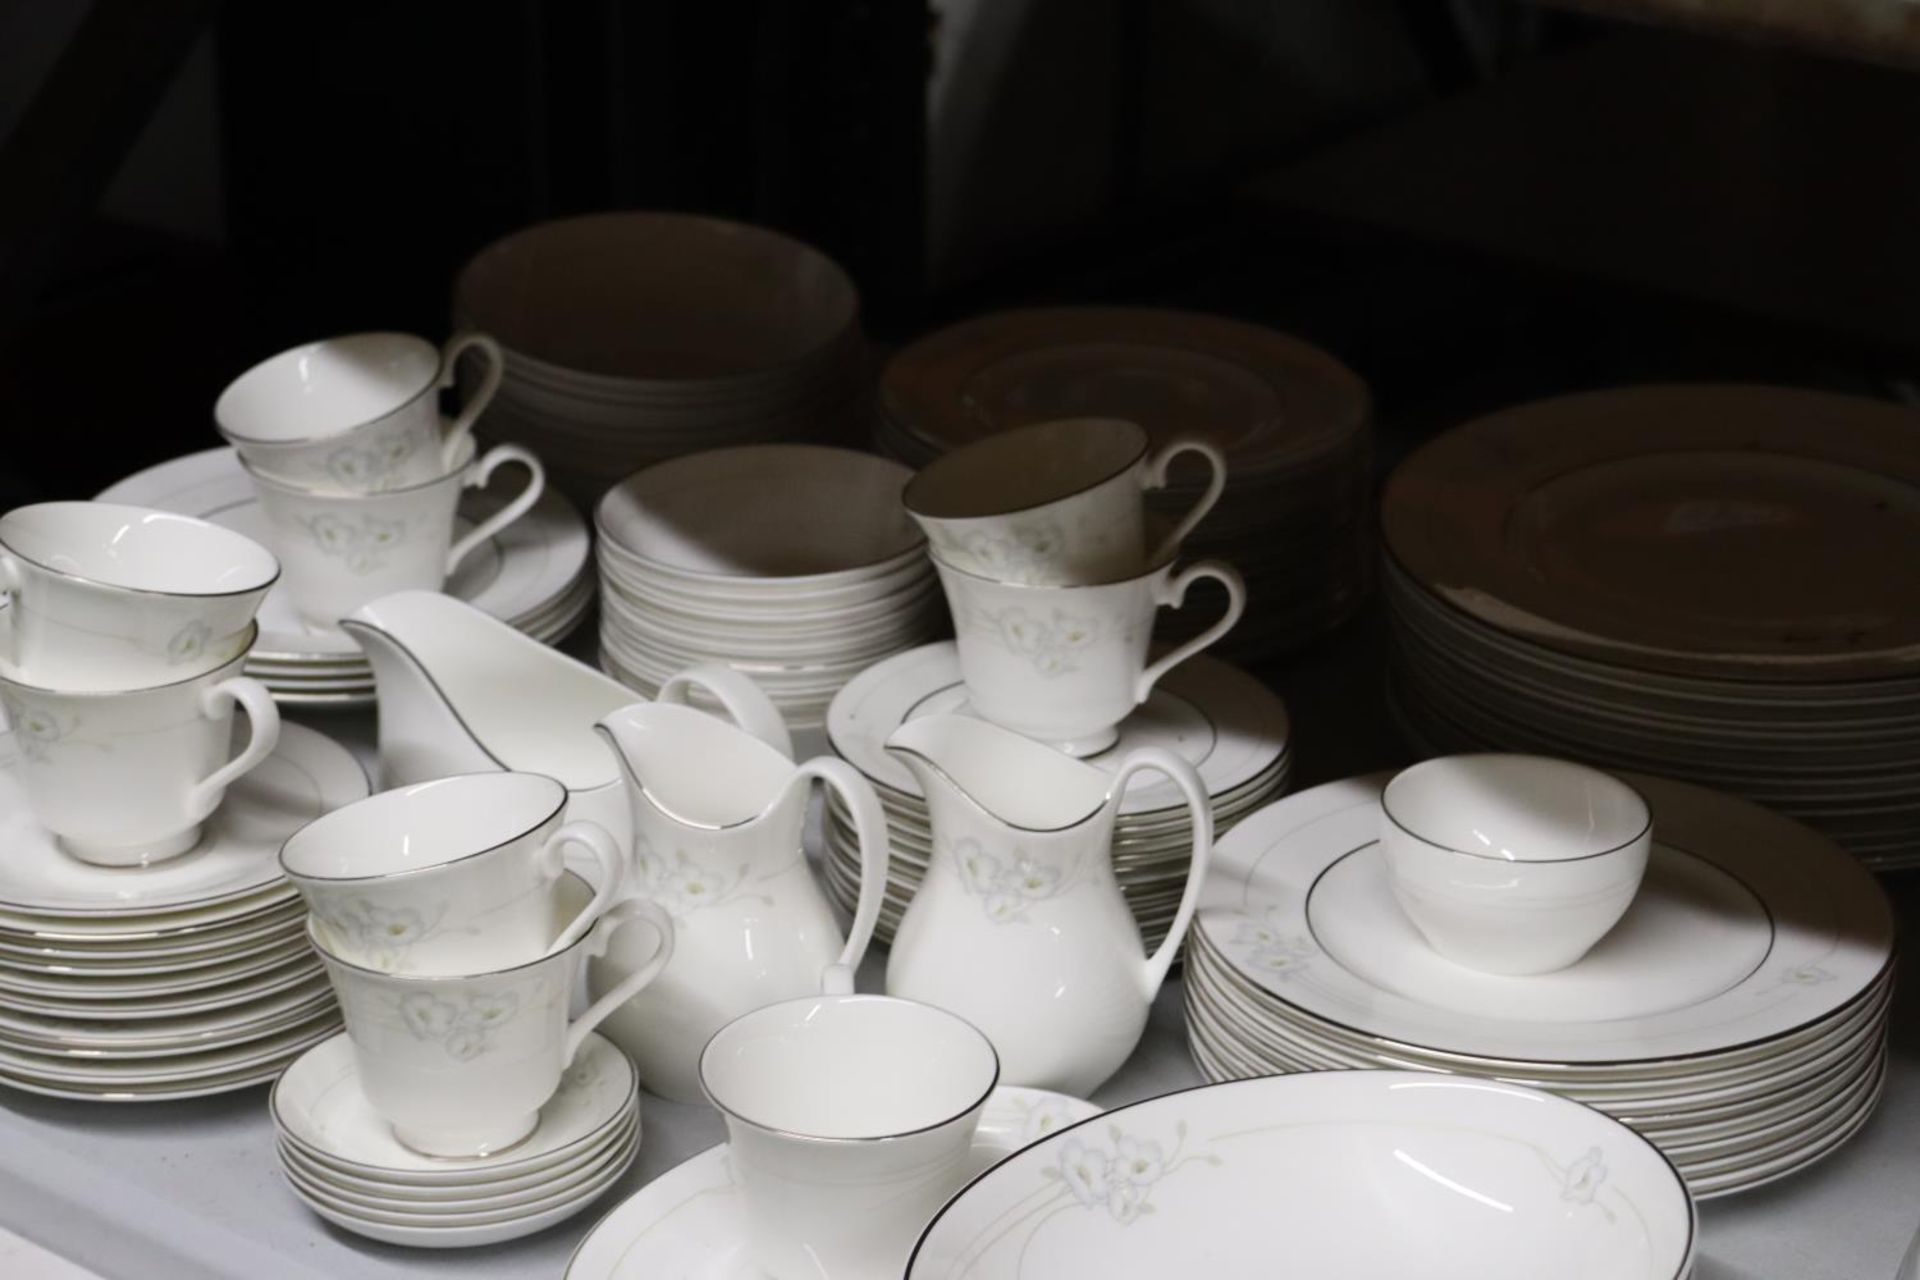 A LARGE QUANTITY OF ROYAL DOULTON "MYSTIQUE" TO INCLUDE DINNER PATES, SAUCE BOAT, SERVING BOWLS, - Image 5 of 5